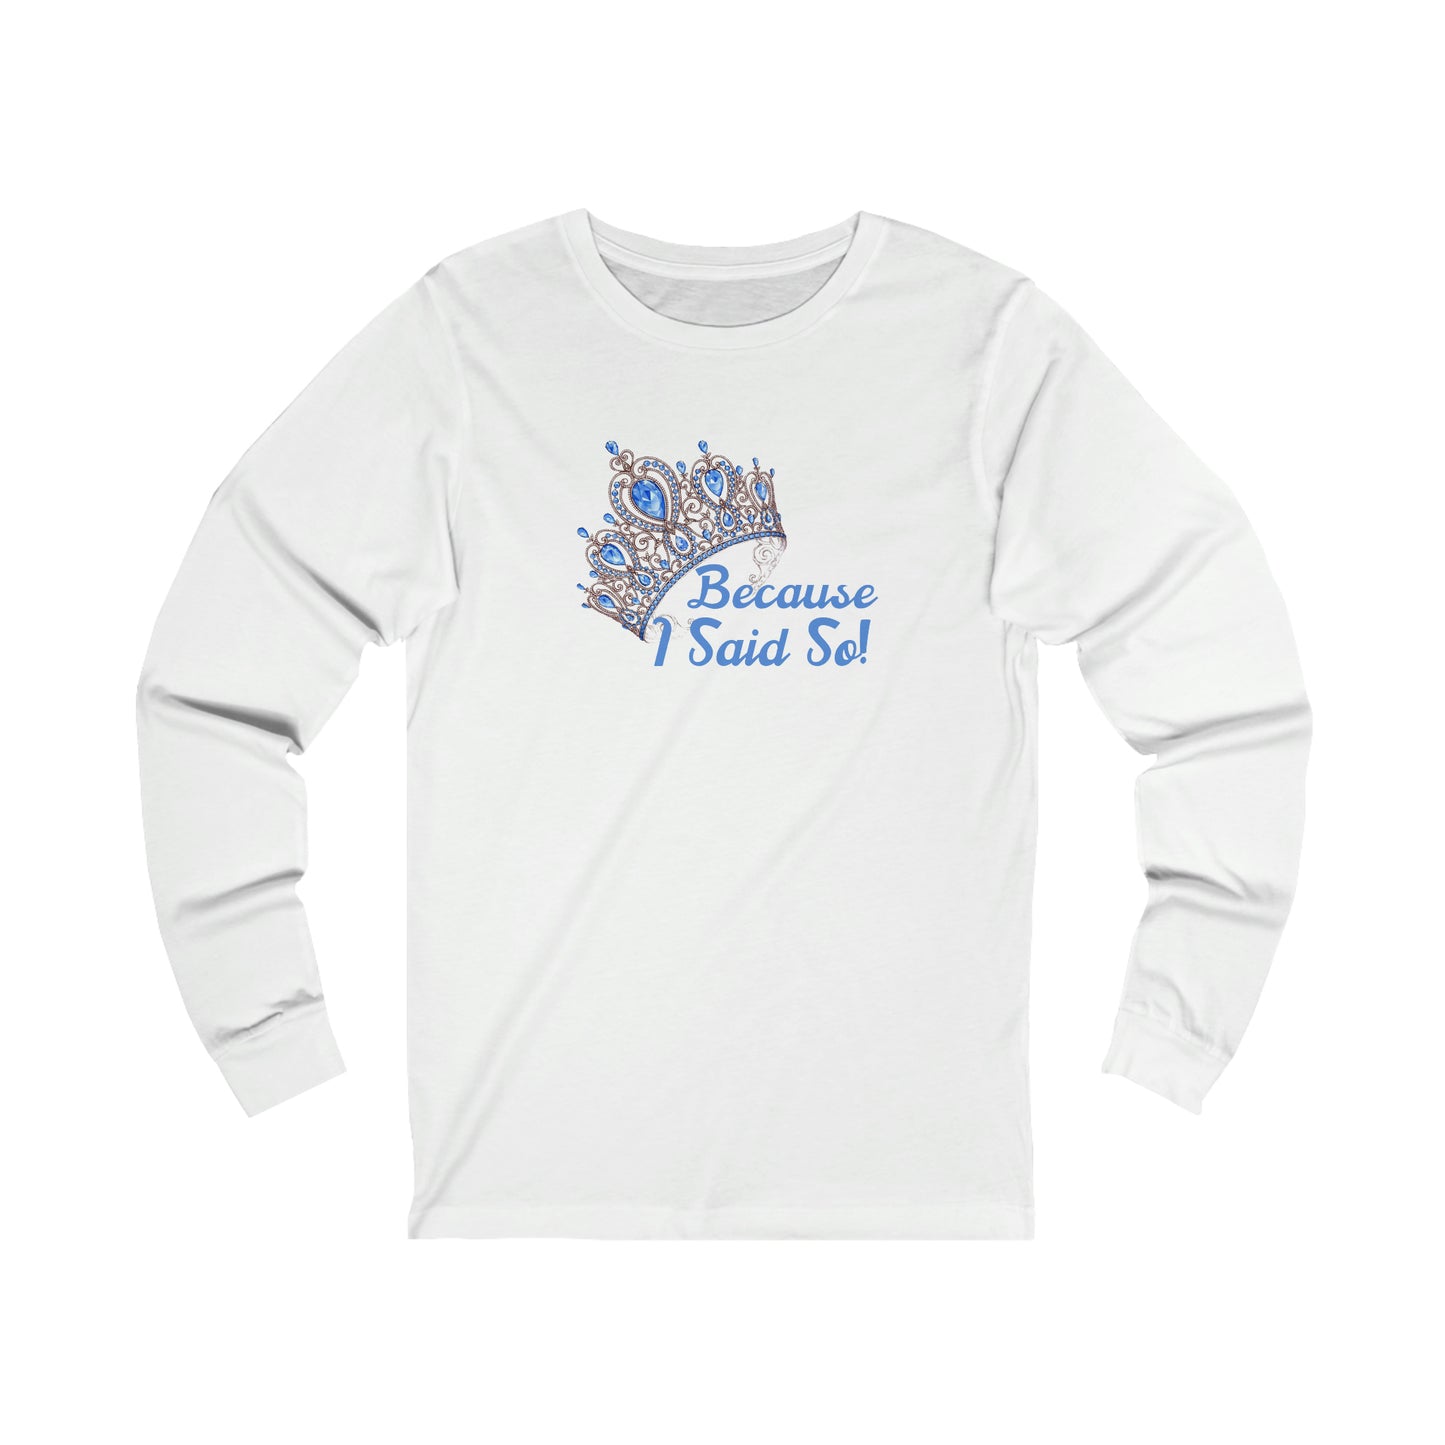 ‘Because I said so!’ Printed Front.  Unisex Jersey Long Sleeve Tee